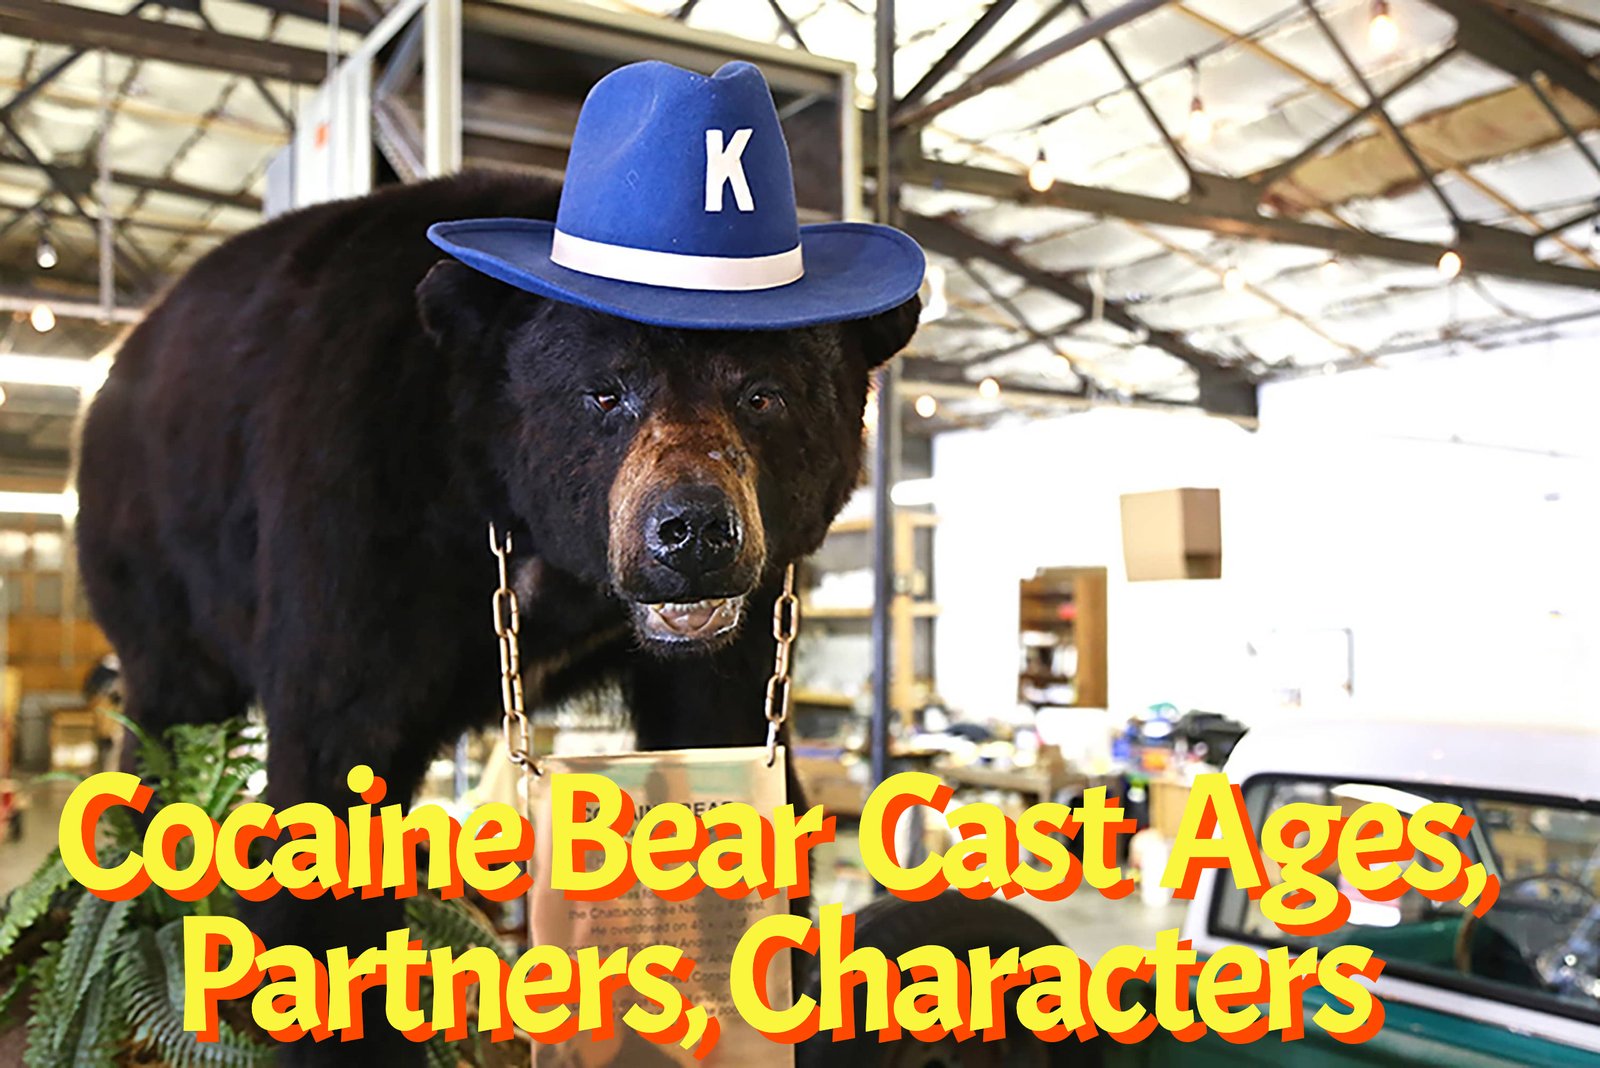 Cocaine Bear Cast - Ages, Partners, Characters